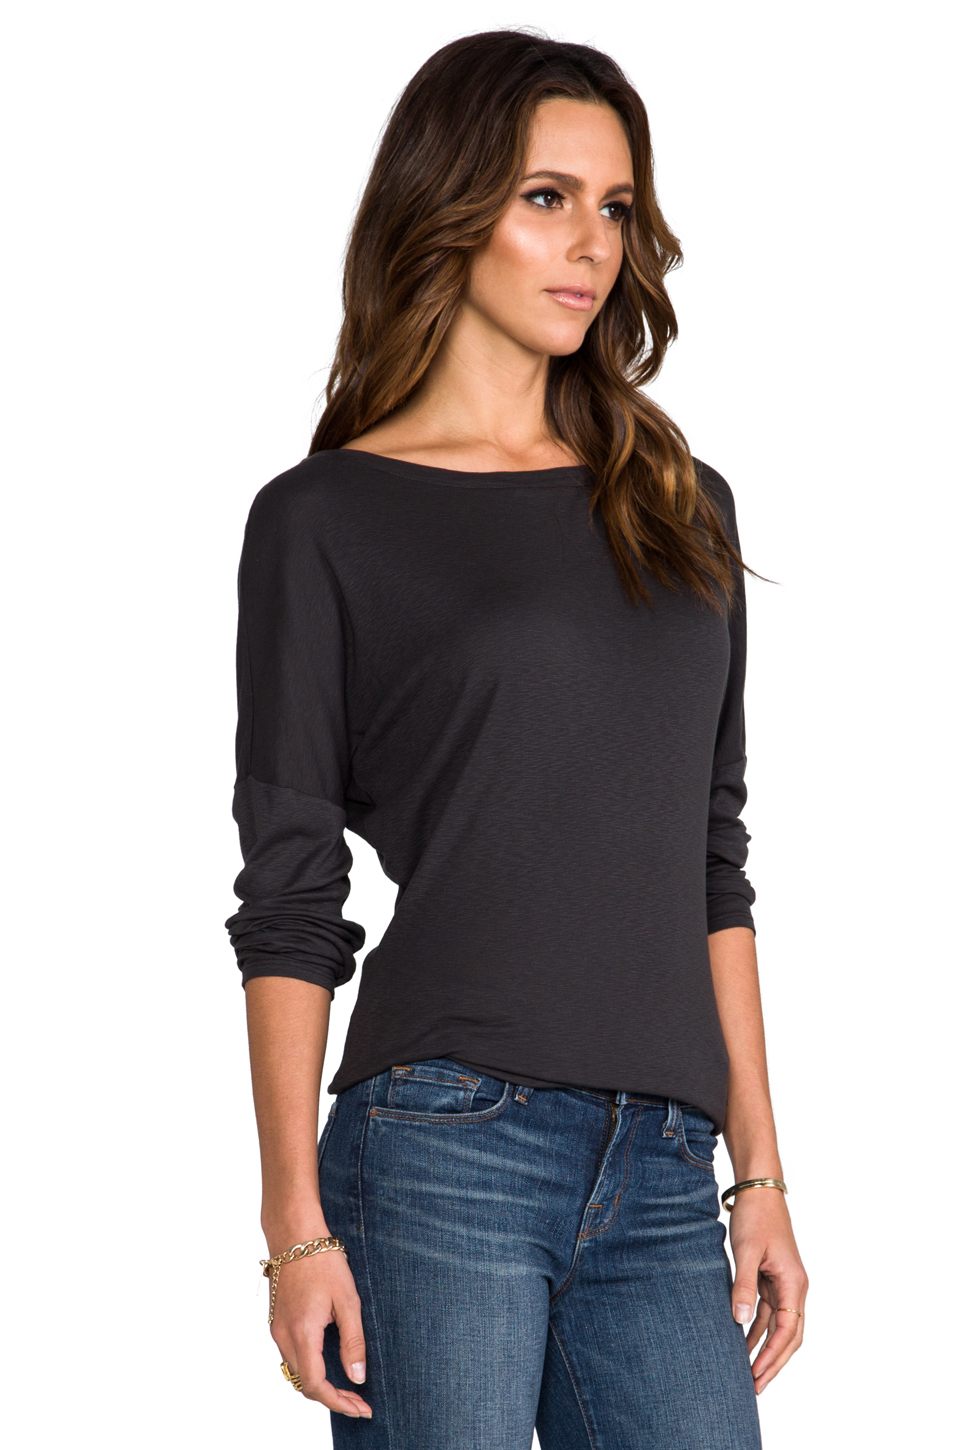 Lyst - Michael Stars Long Sleeve Boat Neck Tee in Charcoal in Black